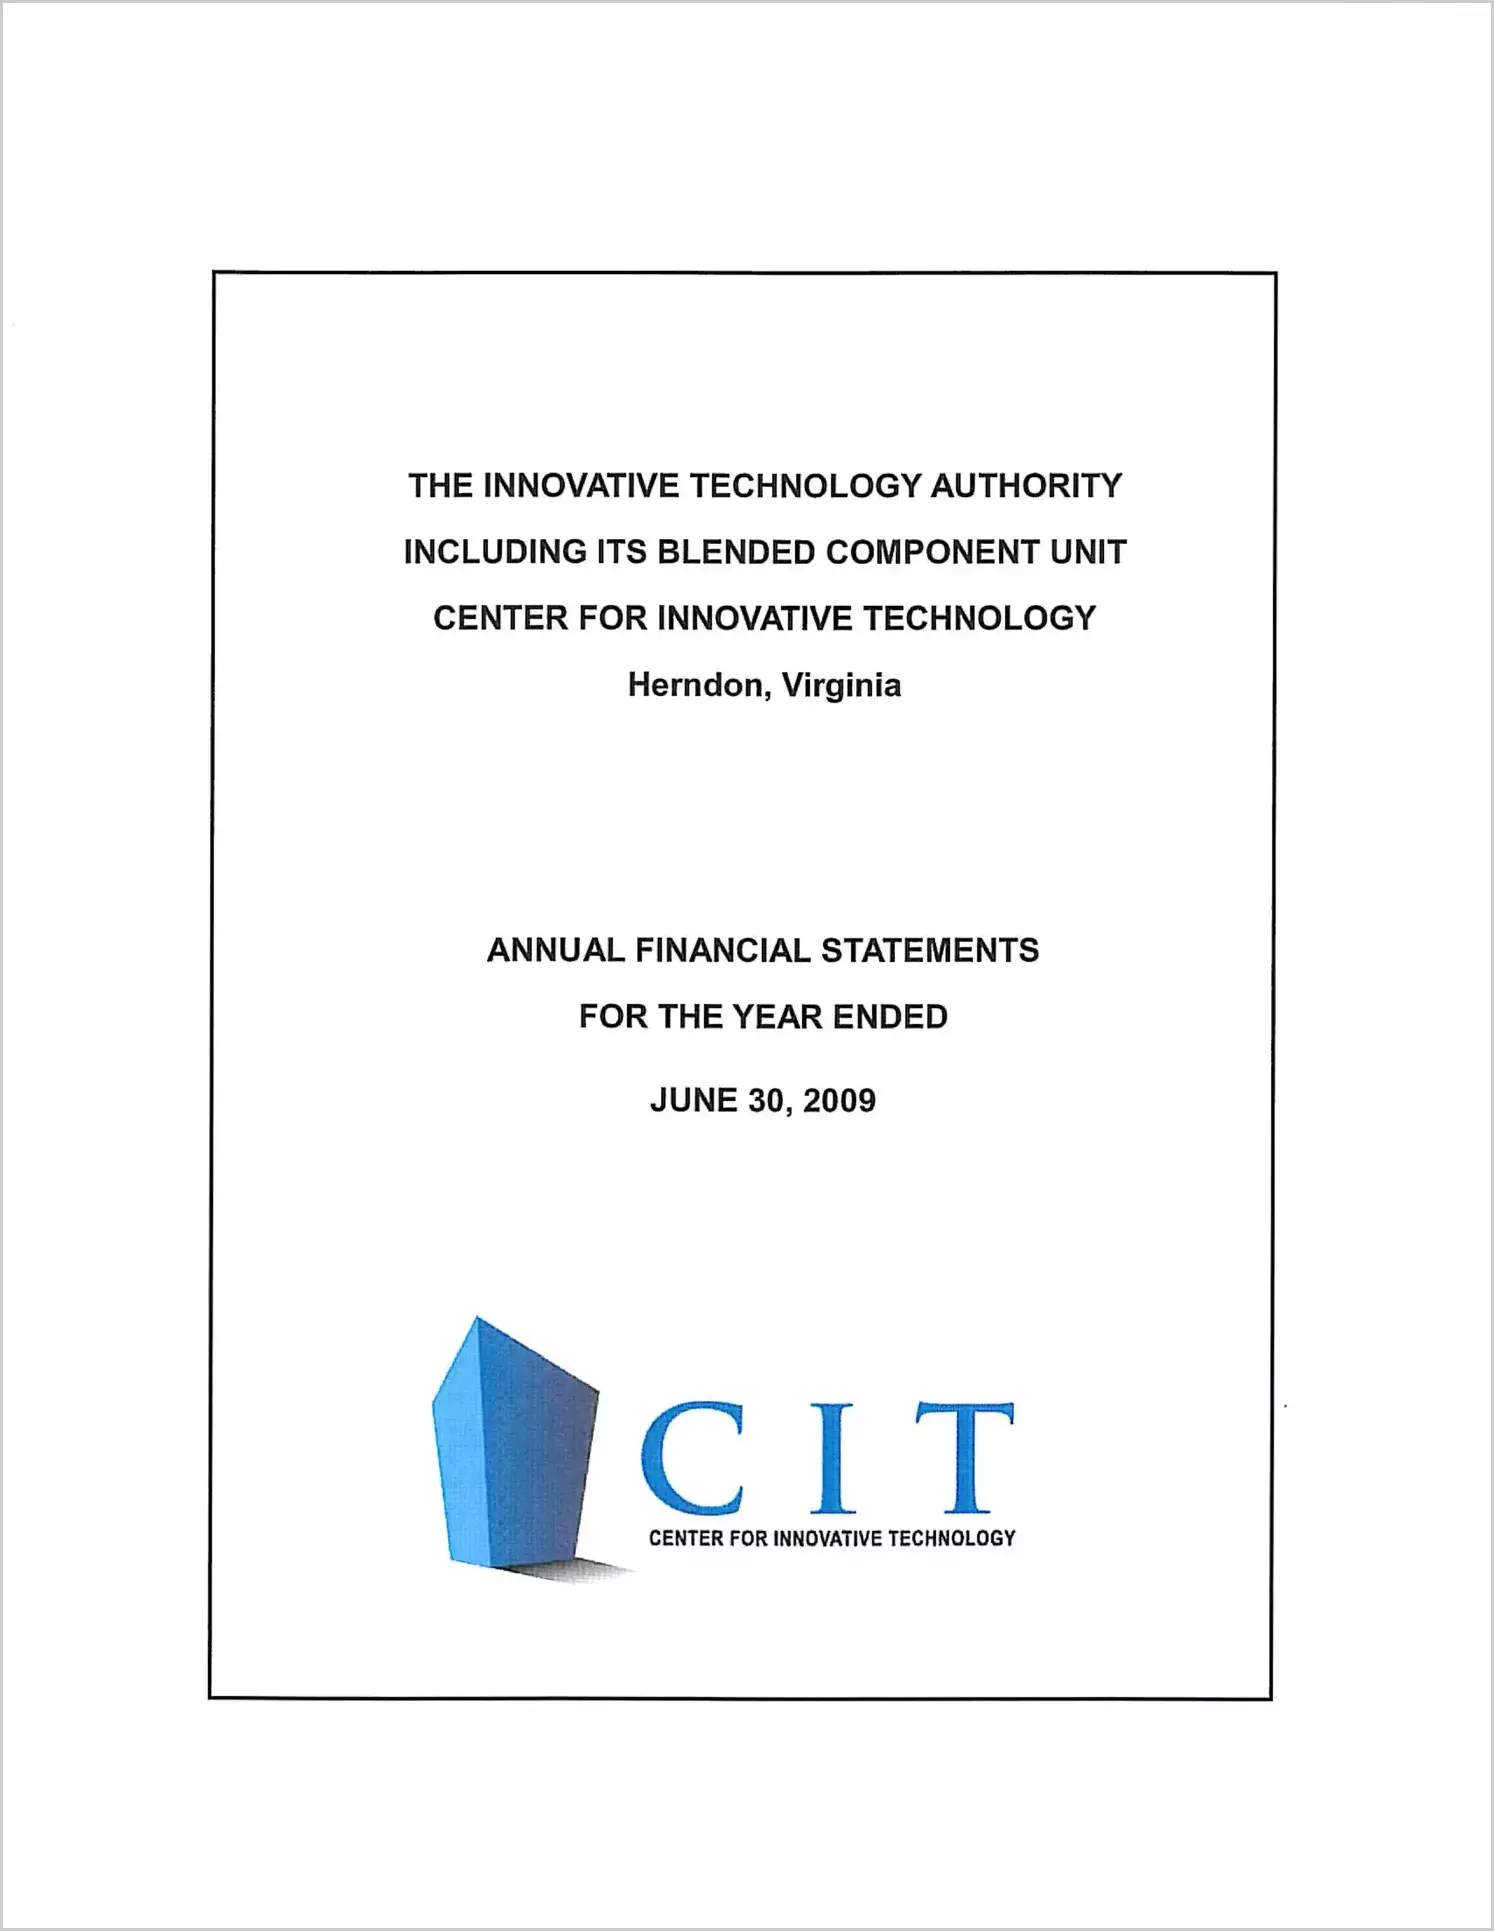 The Innovation Technology Authority Including Its Blended Component Unit Center for Innovative Technology Financial Report for the year ended June 30, 2009